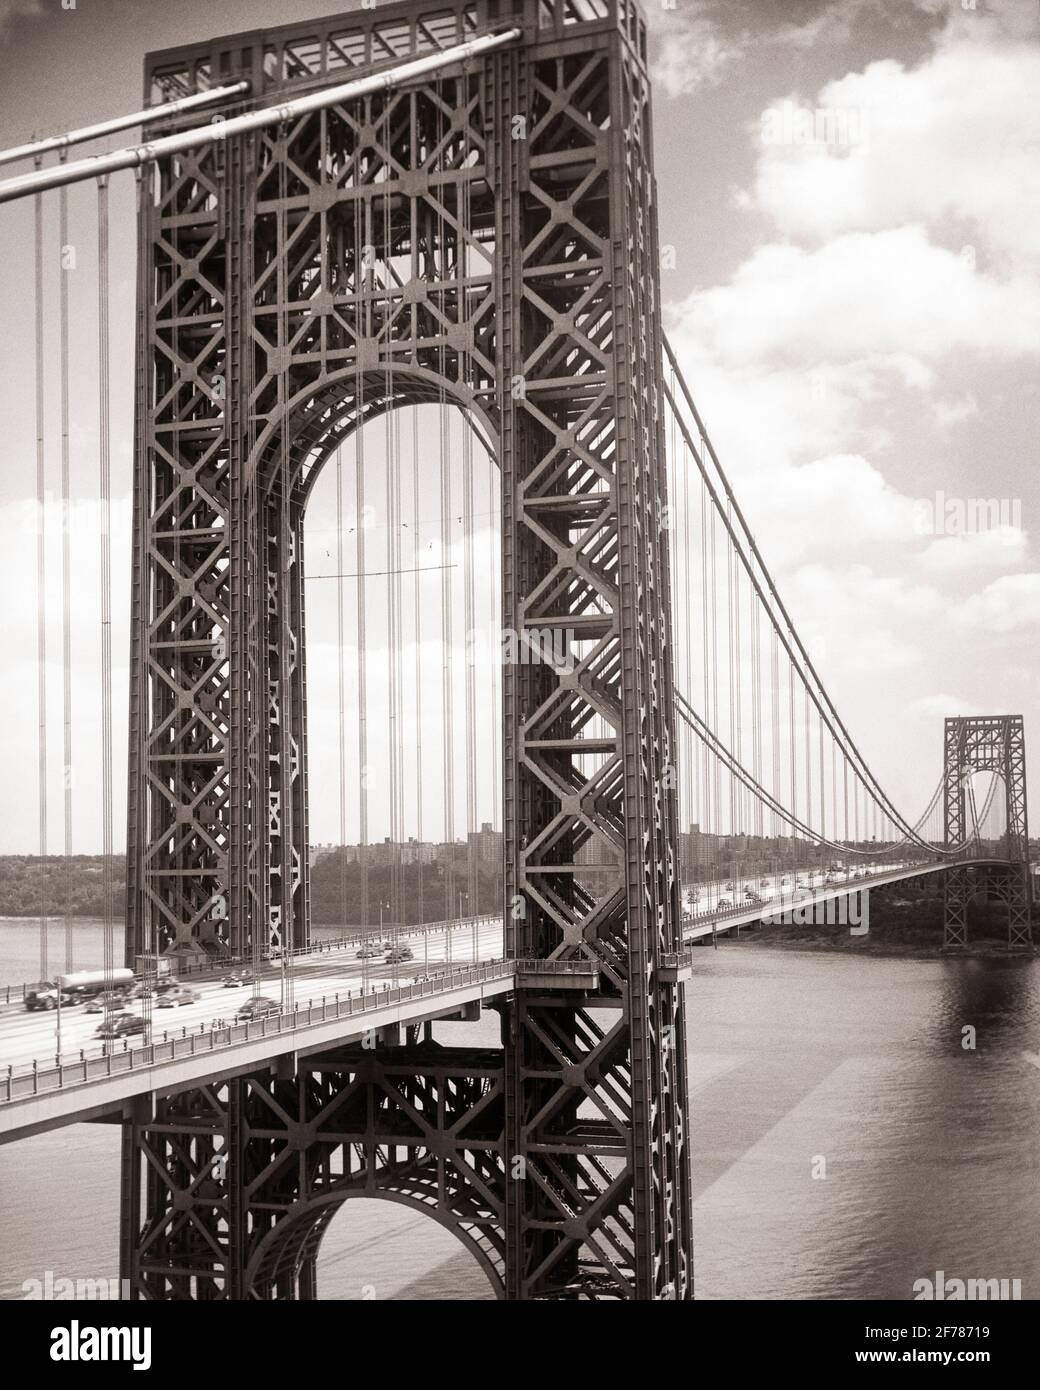 1930s 1940s 1950s GEORGE WASHINGTON BRIDGE OCTOBER 1931 AS ORIGINAL SINGLE SPAN FROM THE NEW JERSEY SIDE AT FORT LEE - b4576 HAR001 HARS CONNECTION ORIGINAL NEW YORK 1931 AUTOMOBILES CITIES VEHICLES GEORGE WASHINGTON NEW JERSEY NEW YORK CITY FORT LEE OCTOBER SPANNING SPAN UPTOWN BLACK AND WHITE BRIDGES HAR001 HUDSON RIVER JOIN LEE OLD FASHIONED SUSPENSION TOWERS Stock Photo